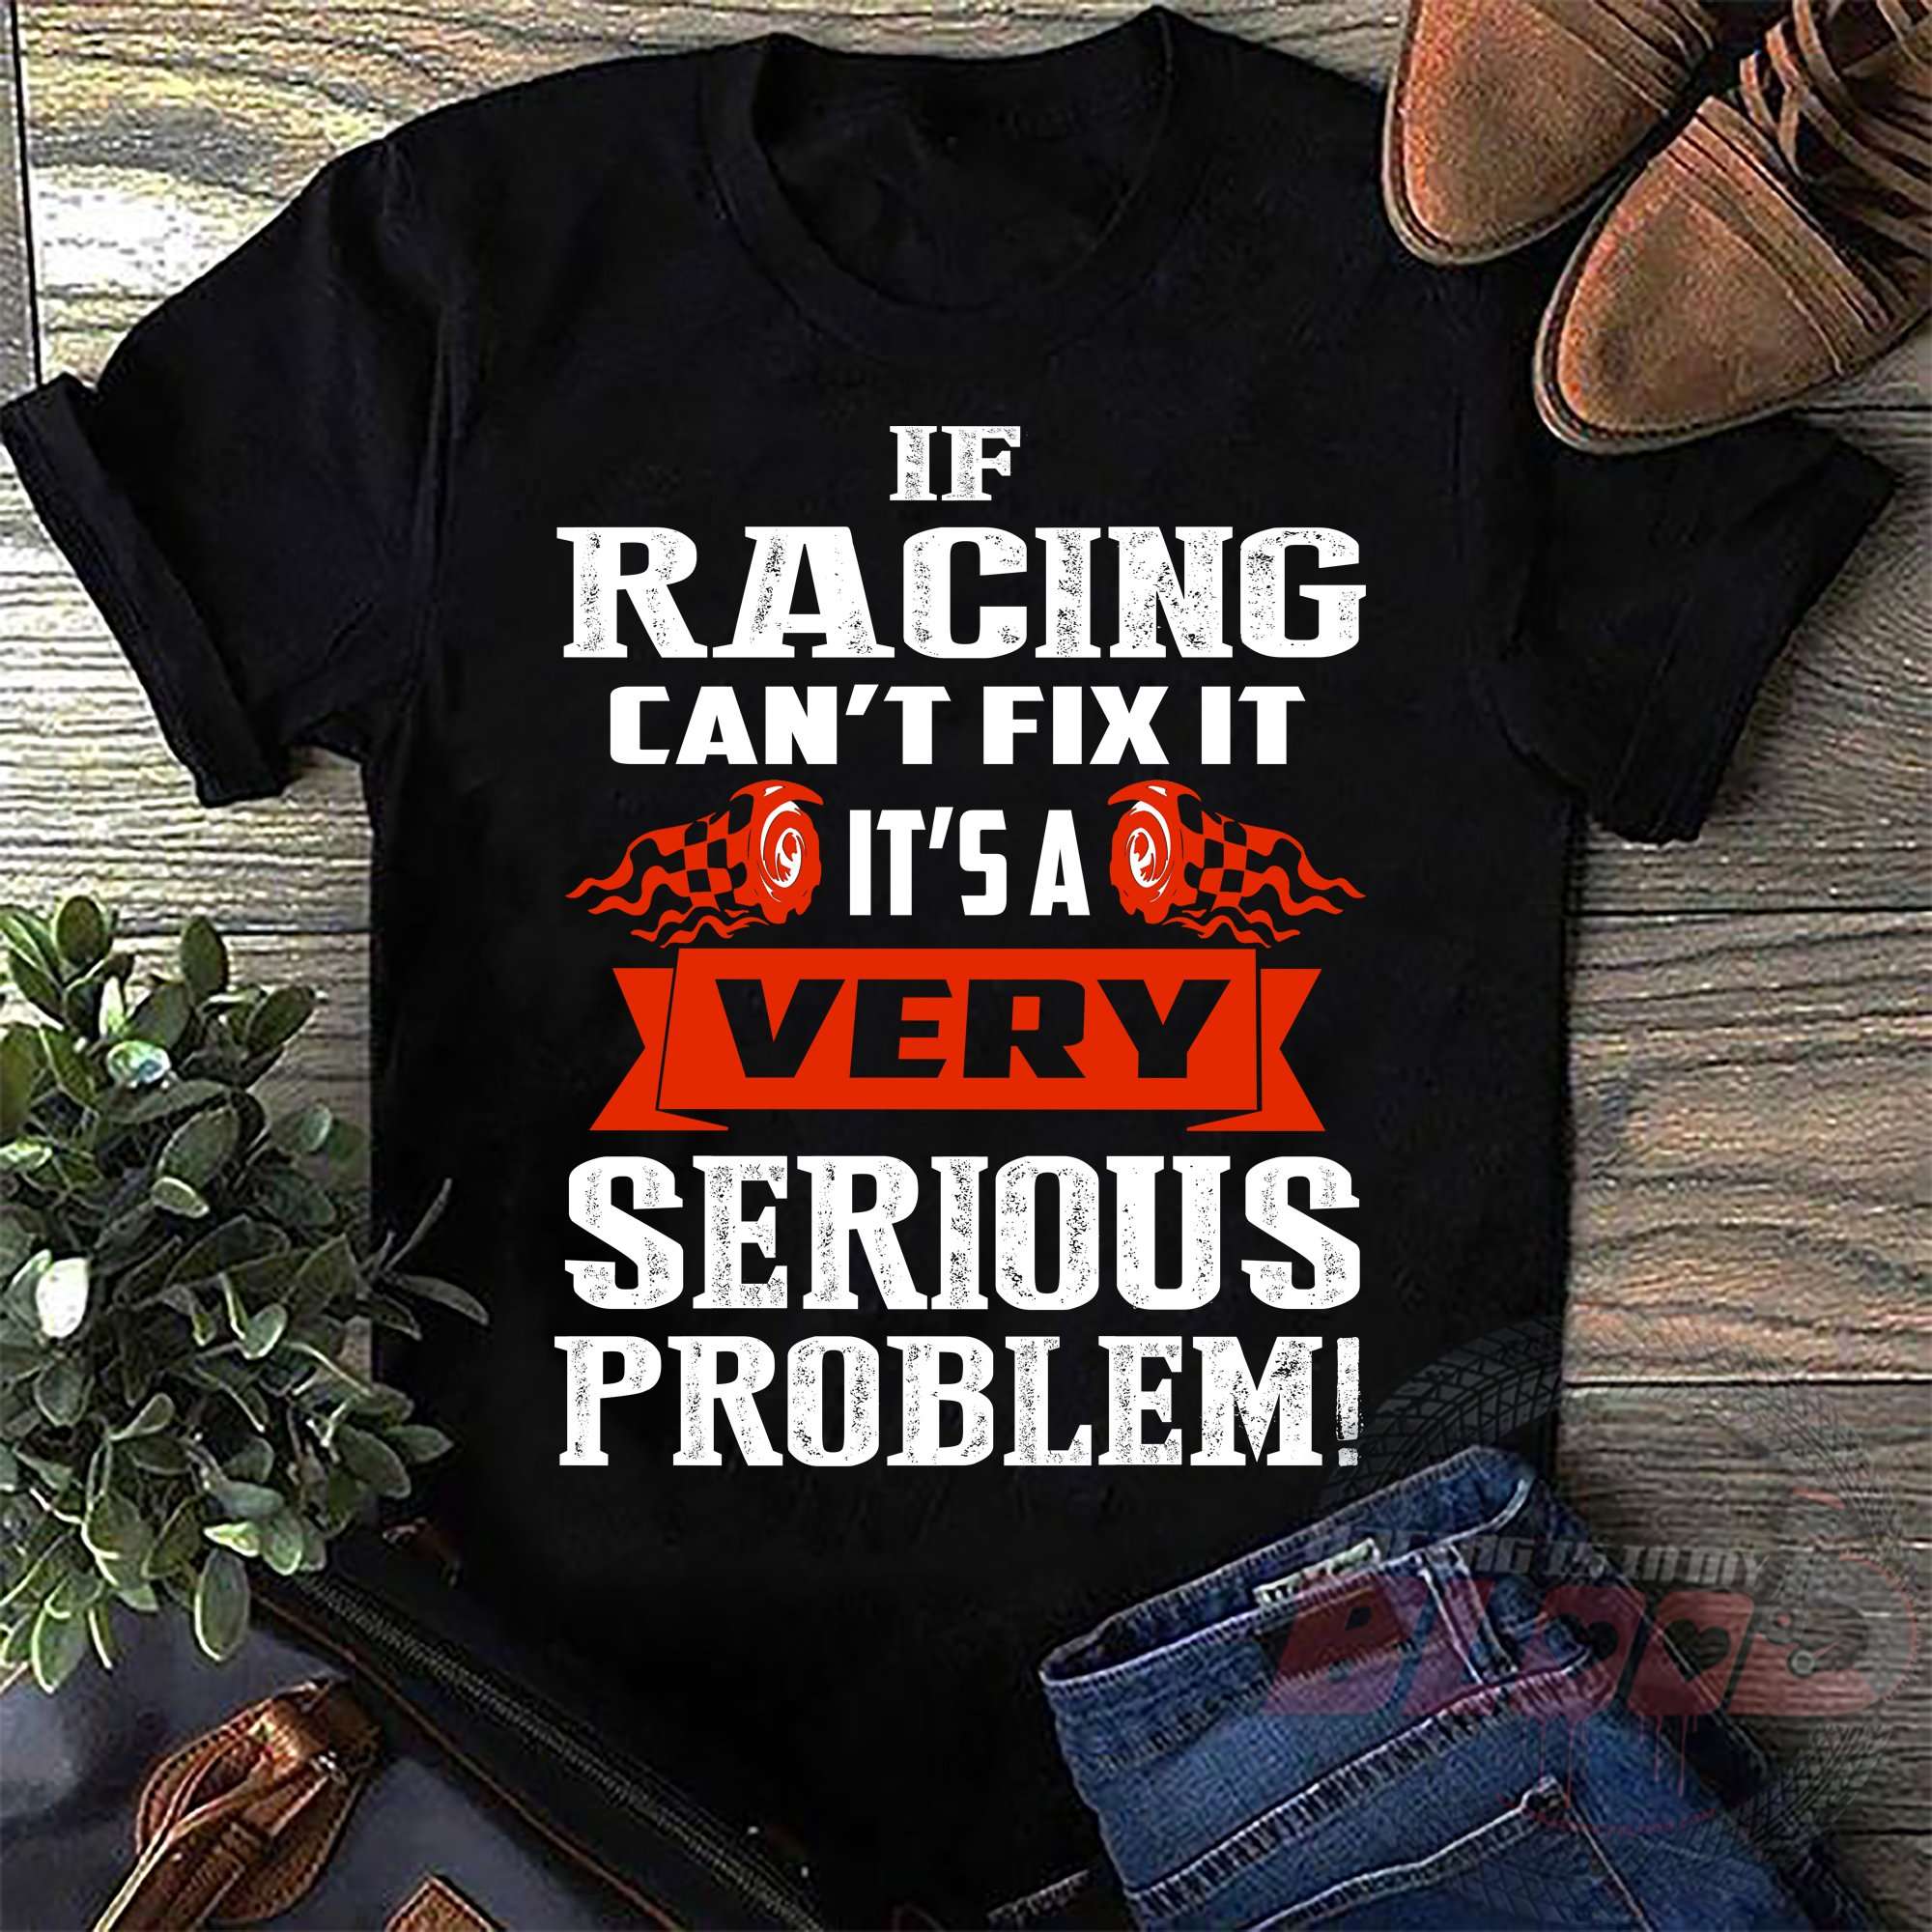 If racing can't fix it it's a very serious problem